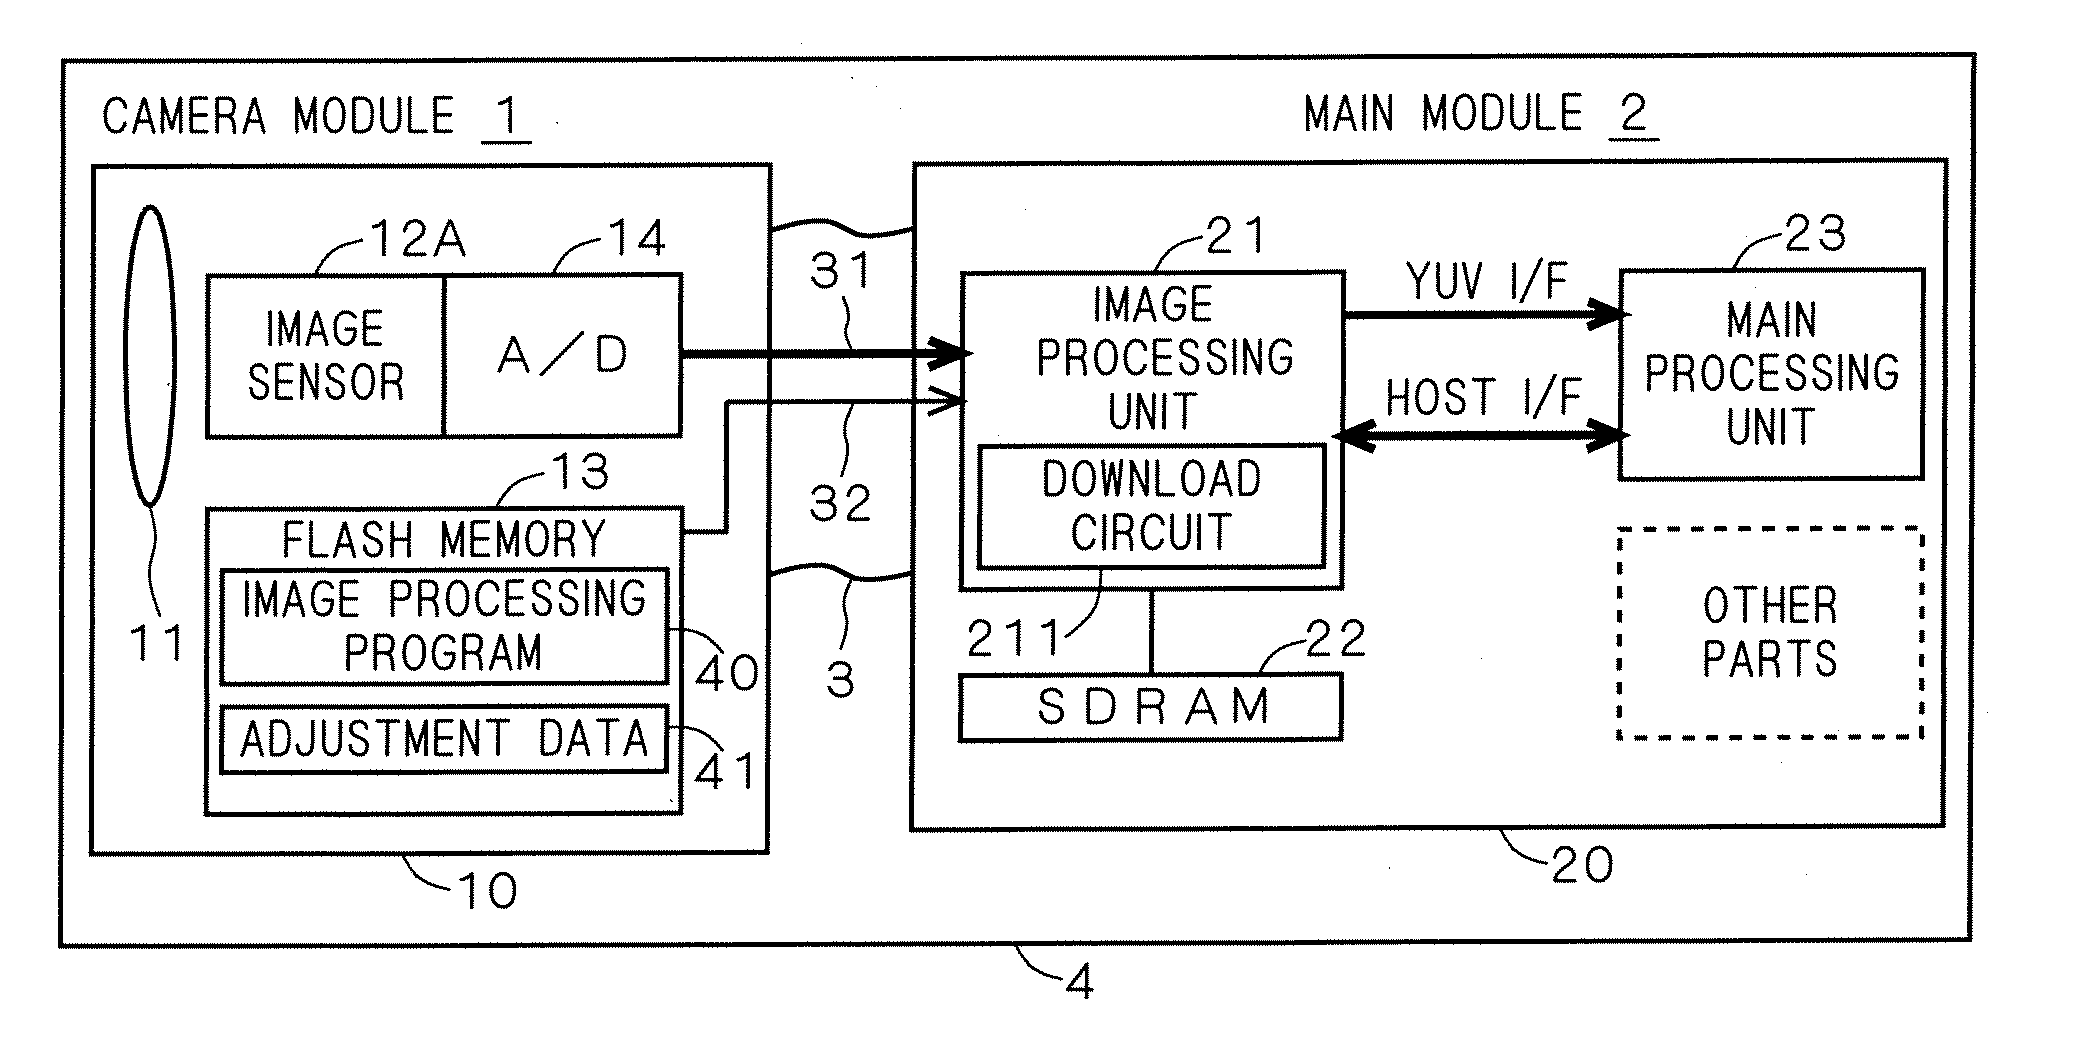 Electronic device with camera and main module incorporated in electronic device with camera